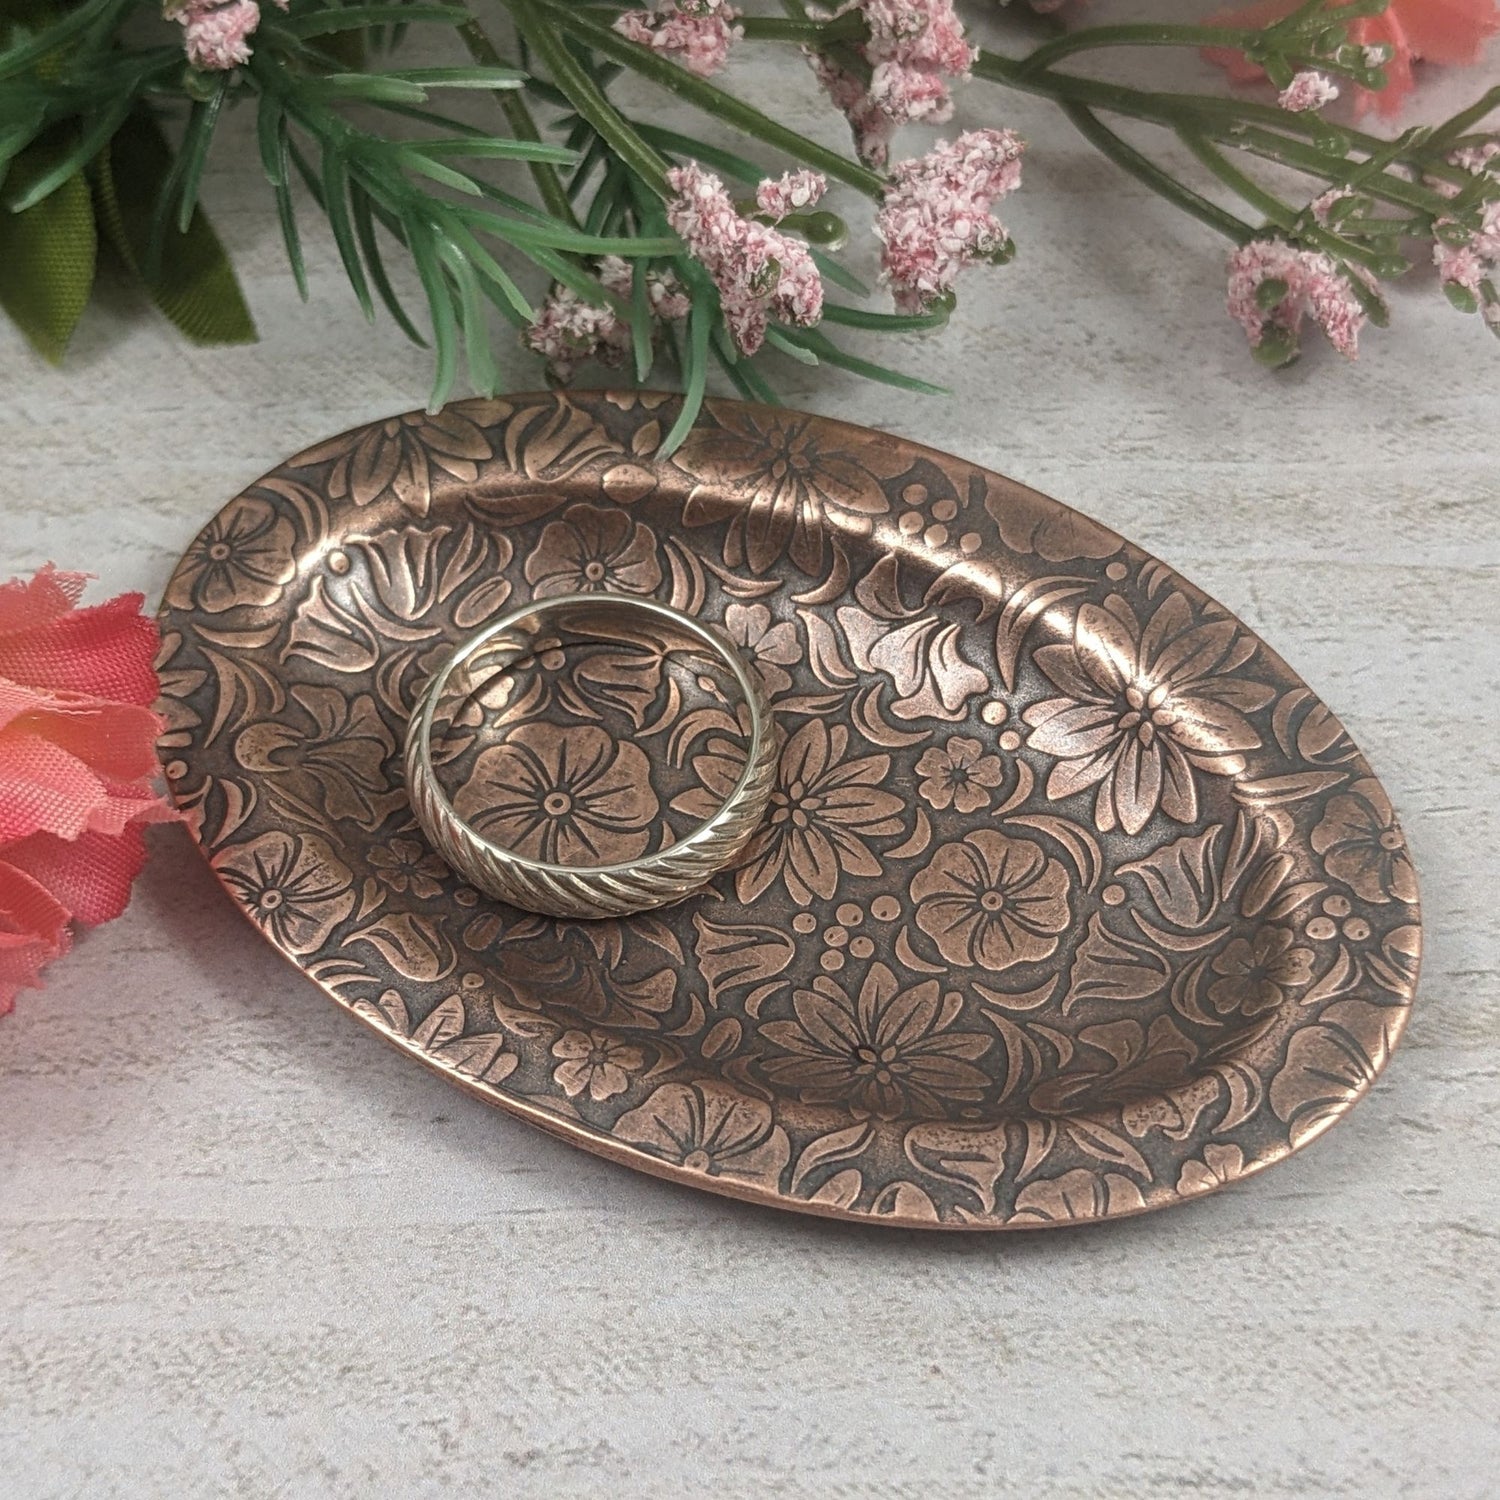 Oval copper ring dish with raised edge. Design of a variety of garden flowers, leaves, and berries covers the entire surface. Staged with a ring and flowers in the background.